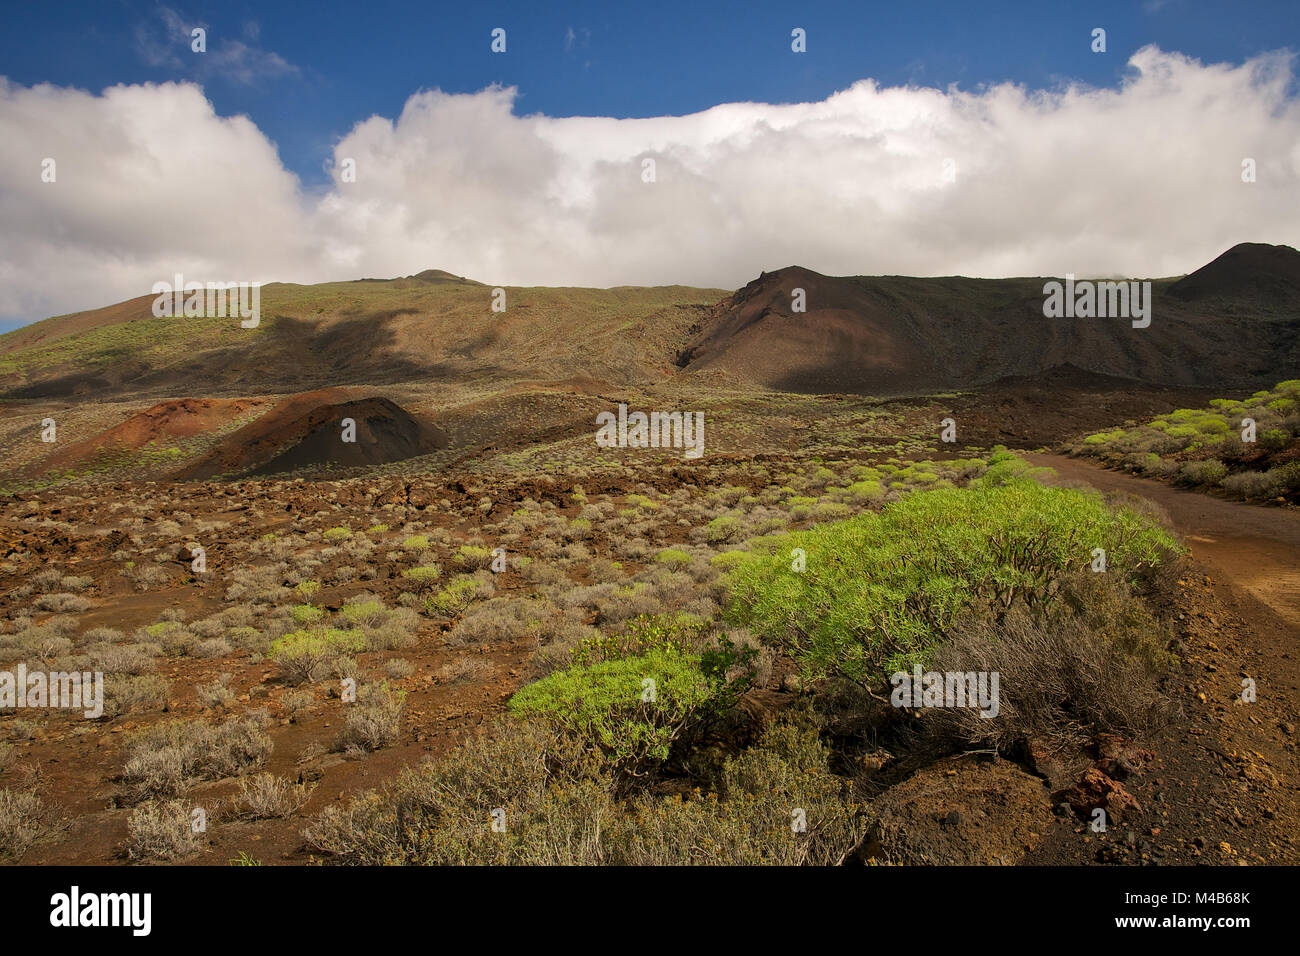 Panoramic view of the surroundings of Punta de la Orchilla, with endemic Euphorbia plants, at El Hierro island (Canary Islands, Spain) Stock Photo